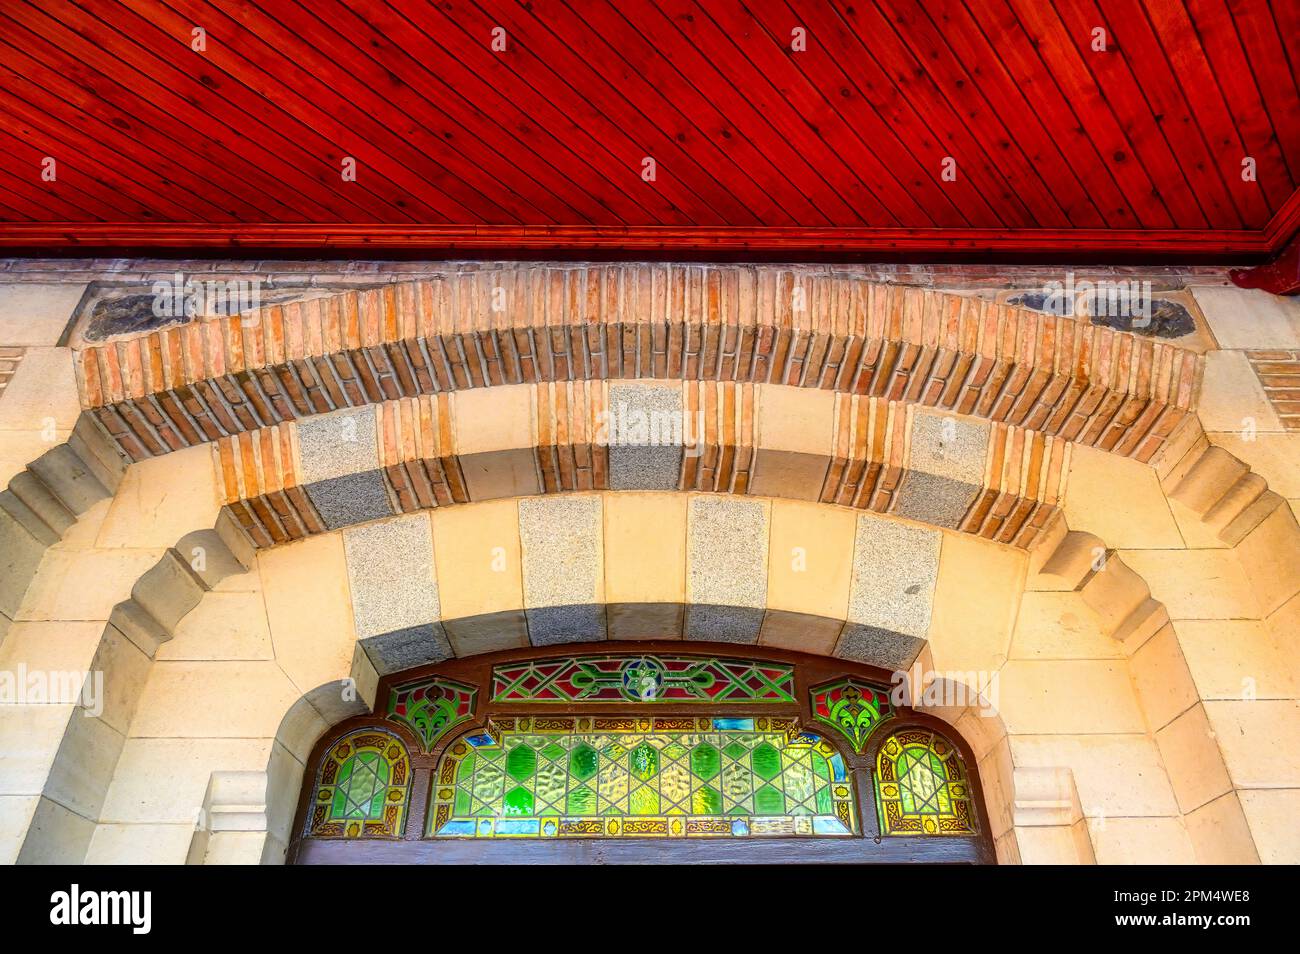 Detail of arched window with stained glass and part of the ceiling. Old antique architecture of the Toledo AVE station. The transportation building is Stock Photo